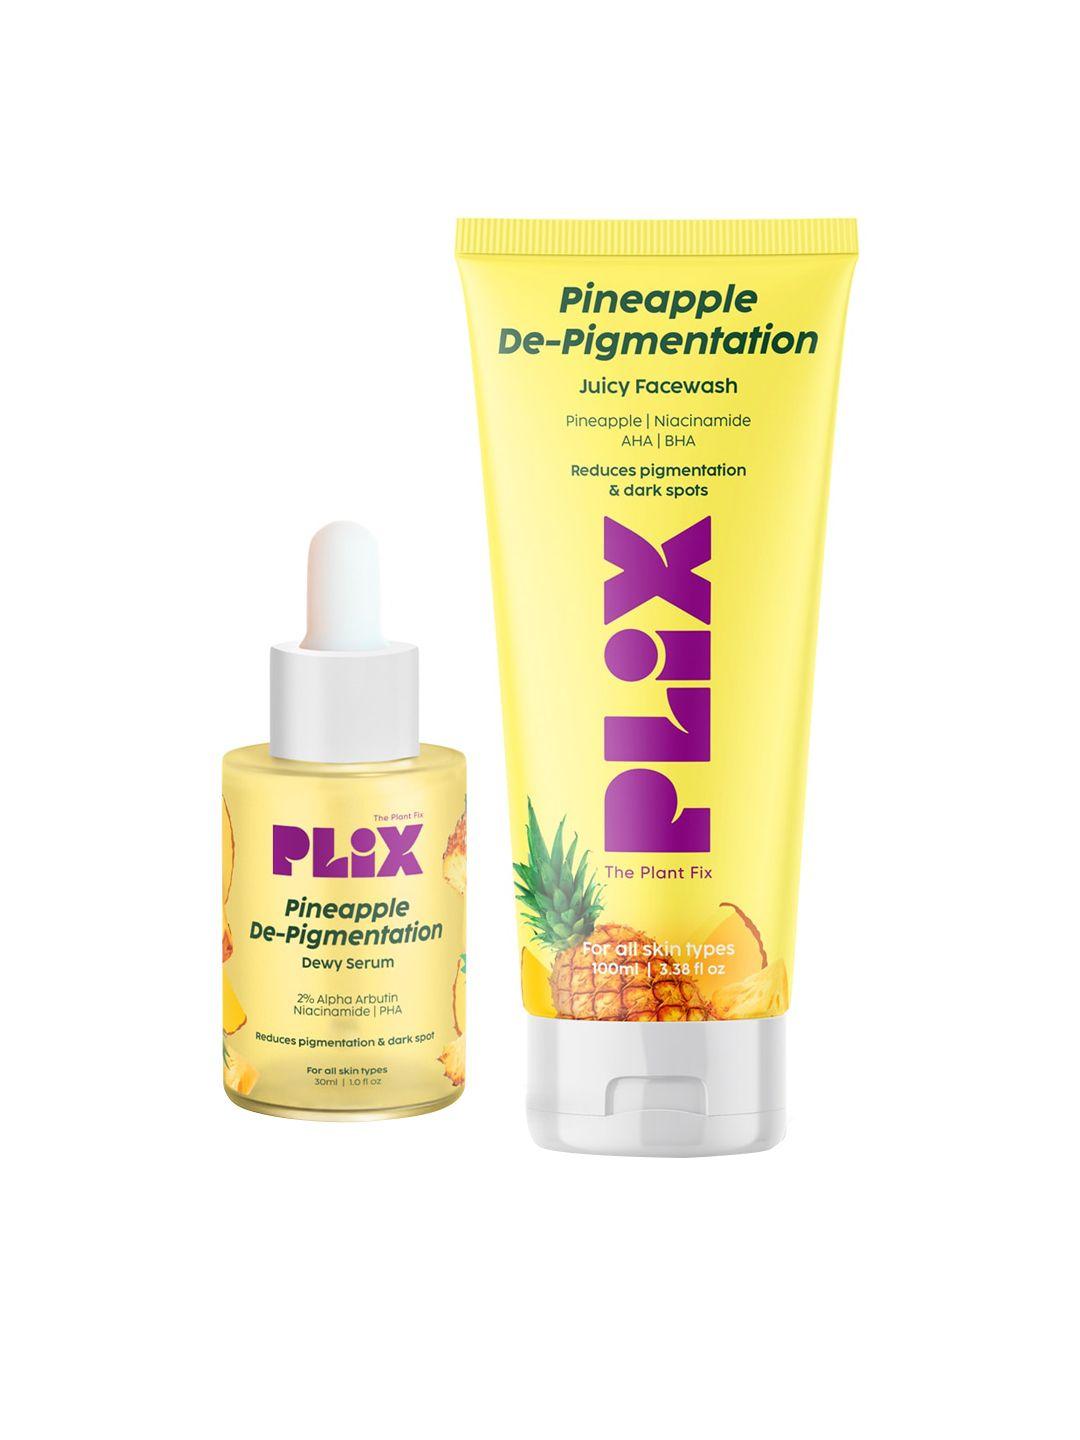 plix pineapple foaming face wash and serum